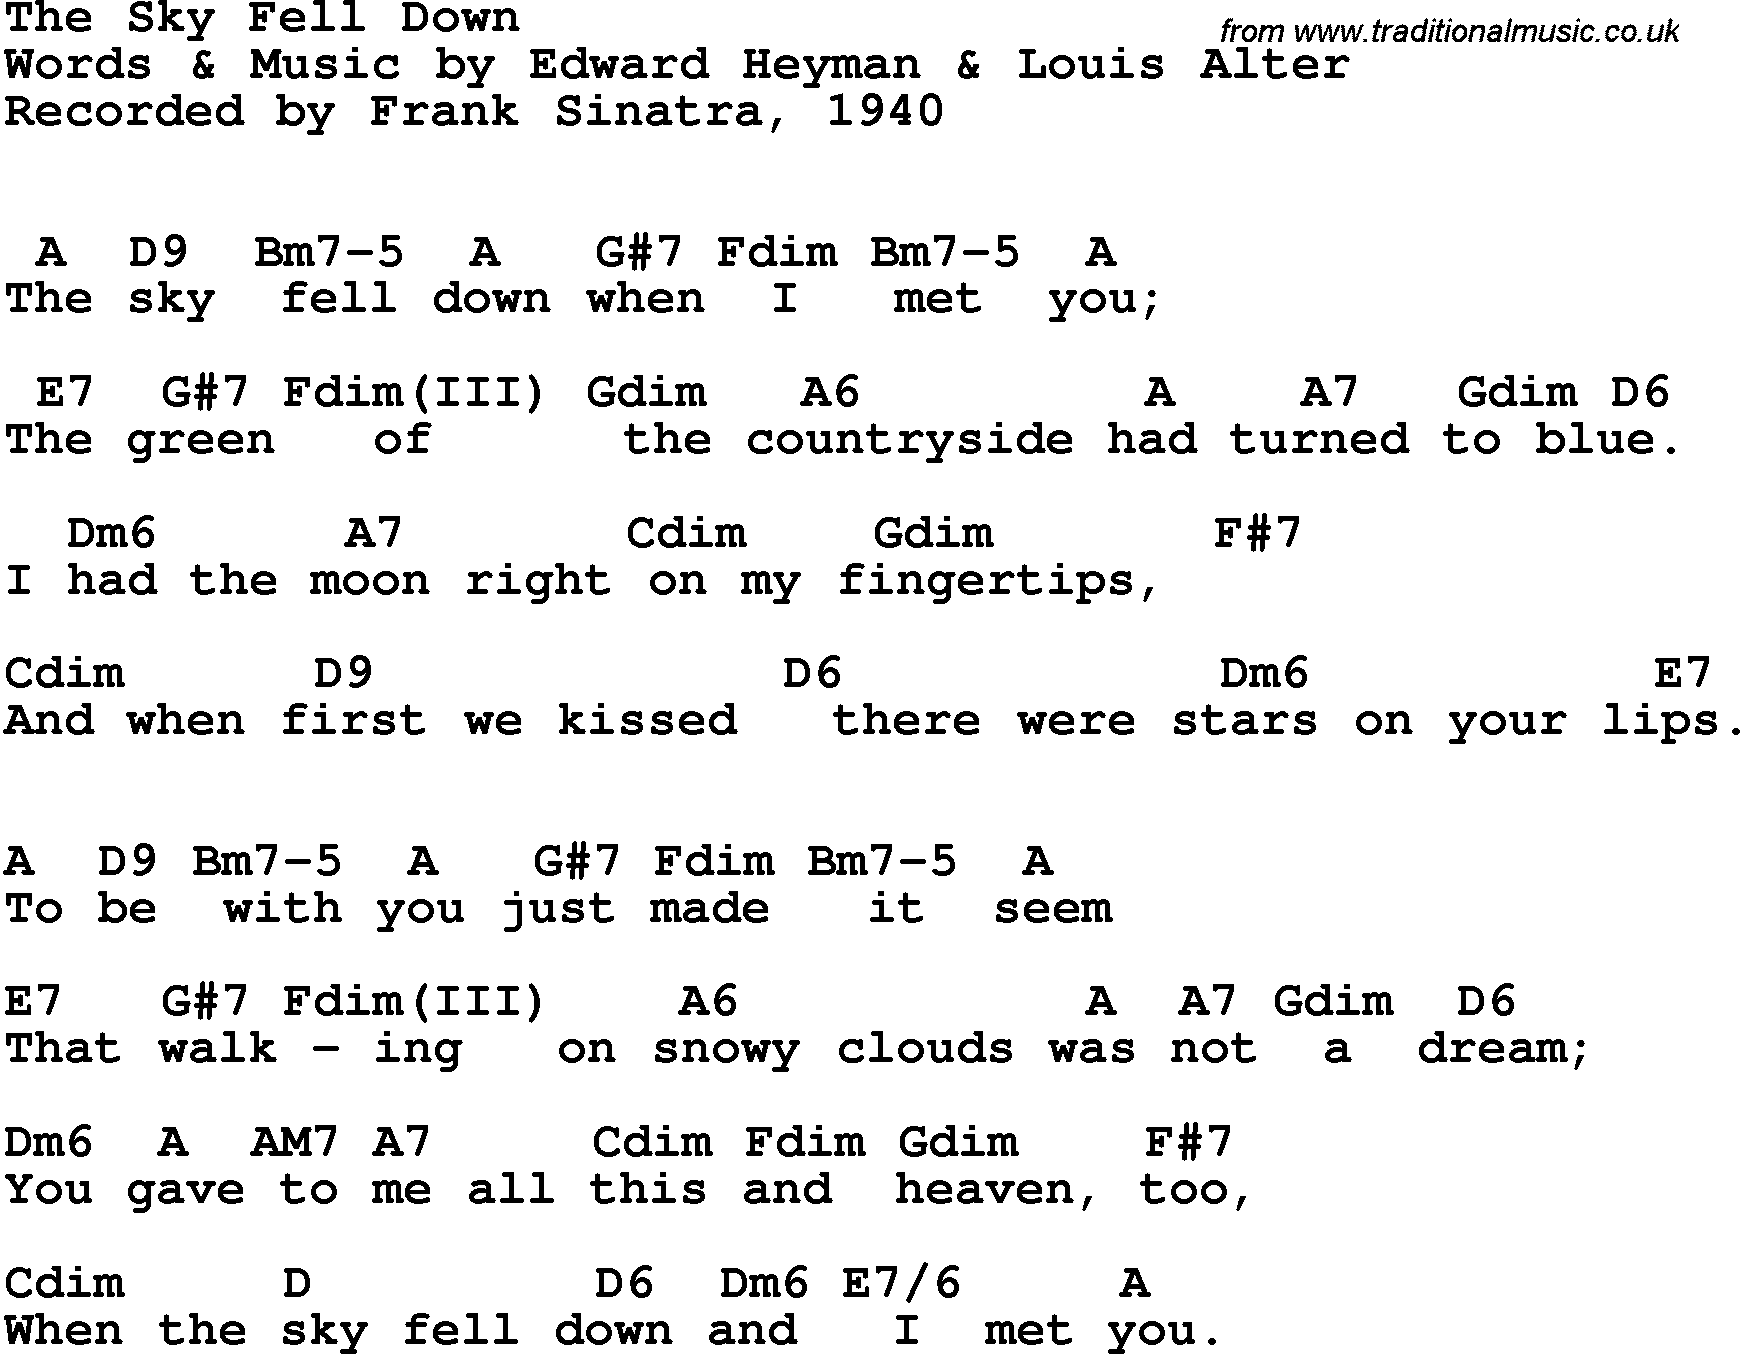 Song Lyrics with guitar chords for Sky Fell Down, The- Frank Sinatra, 1940